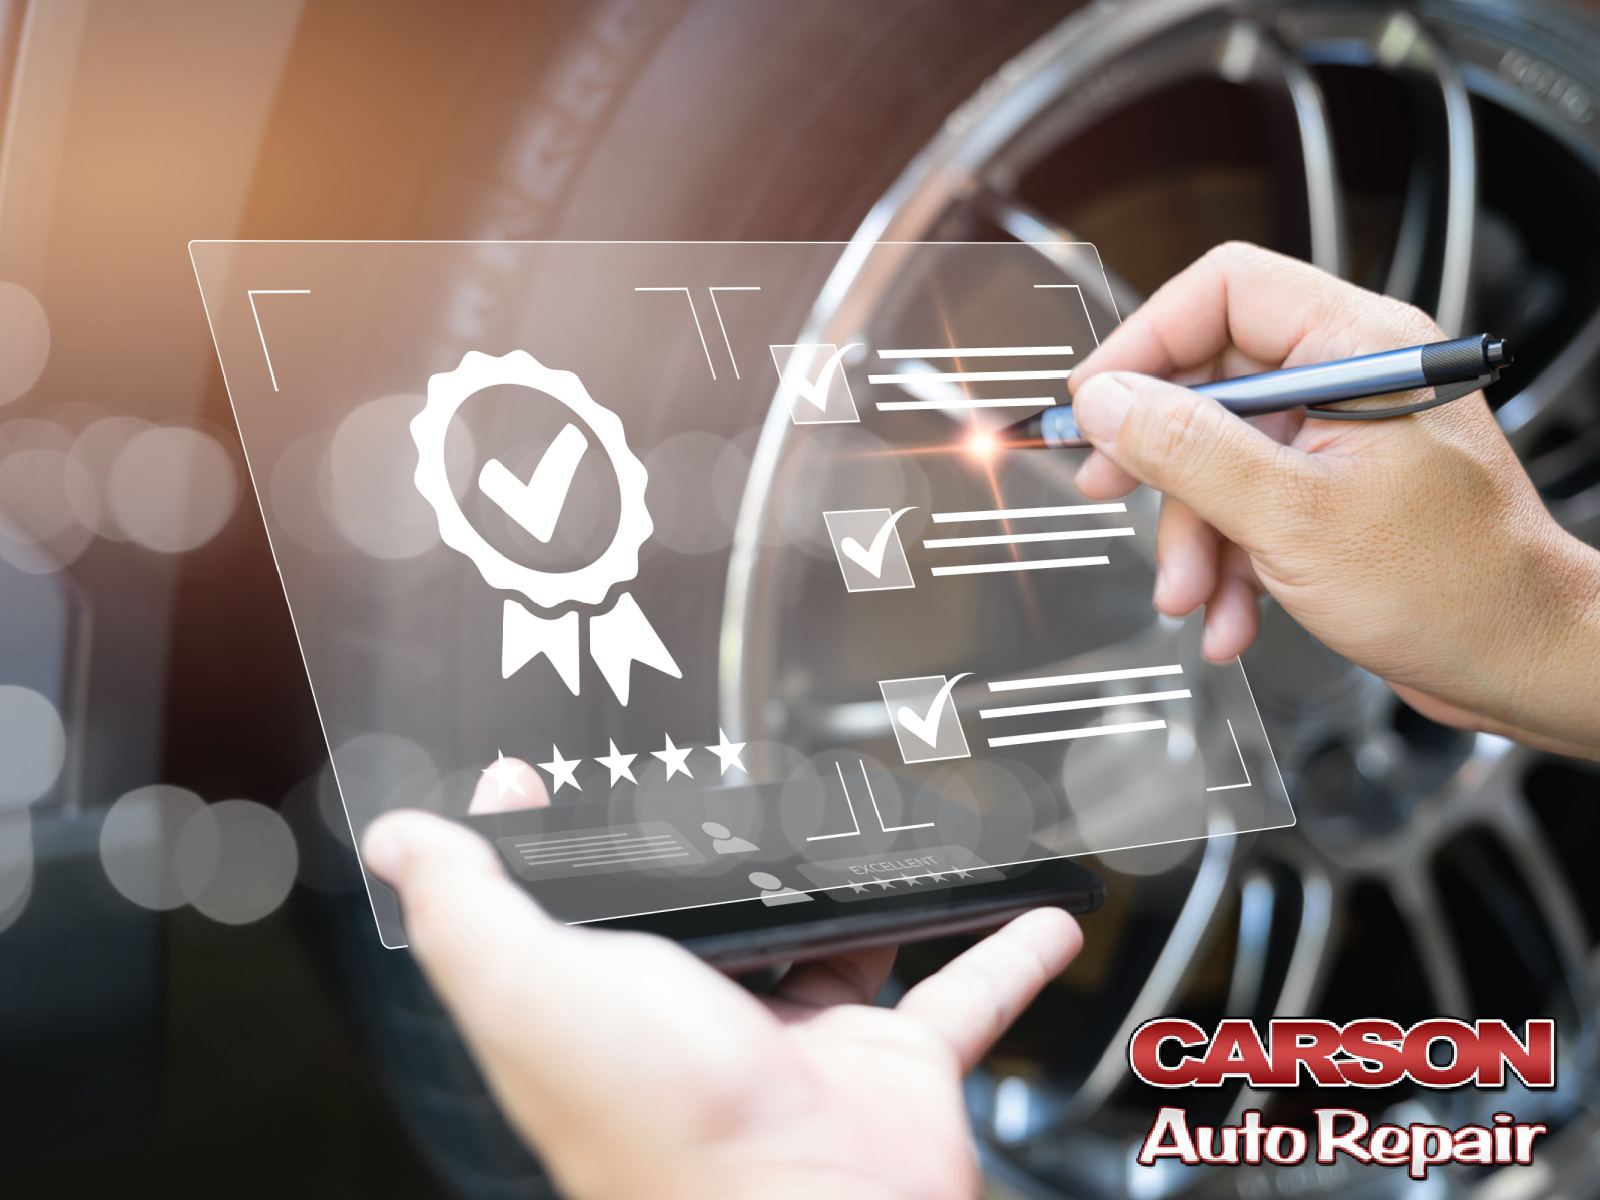 Keep Your Vehicle Running Strong with Our Car Repair Services!